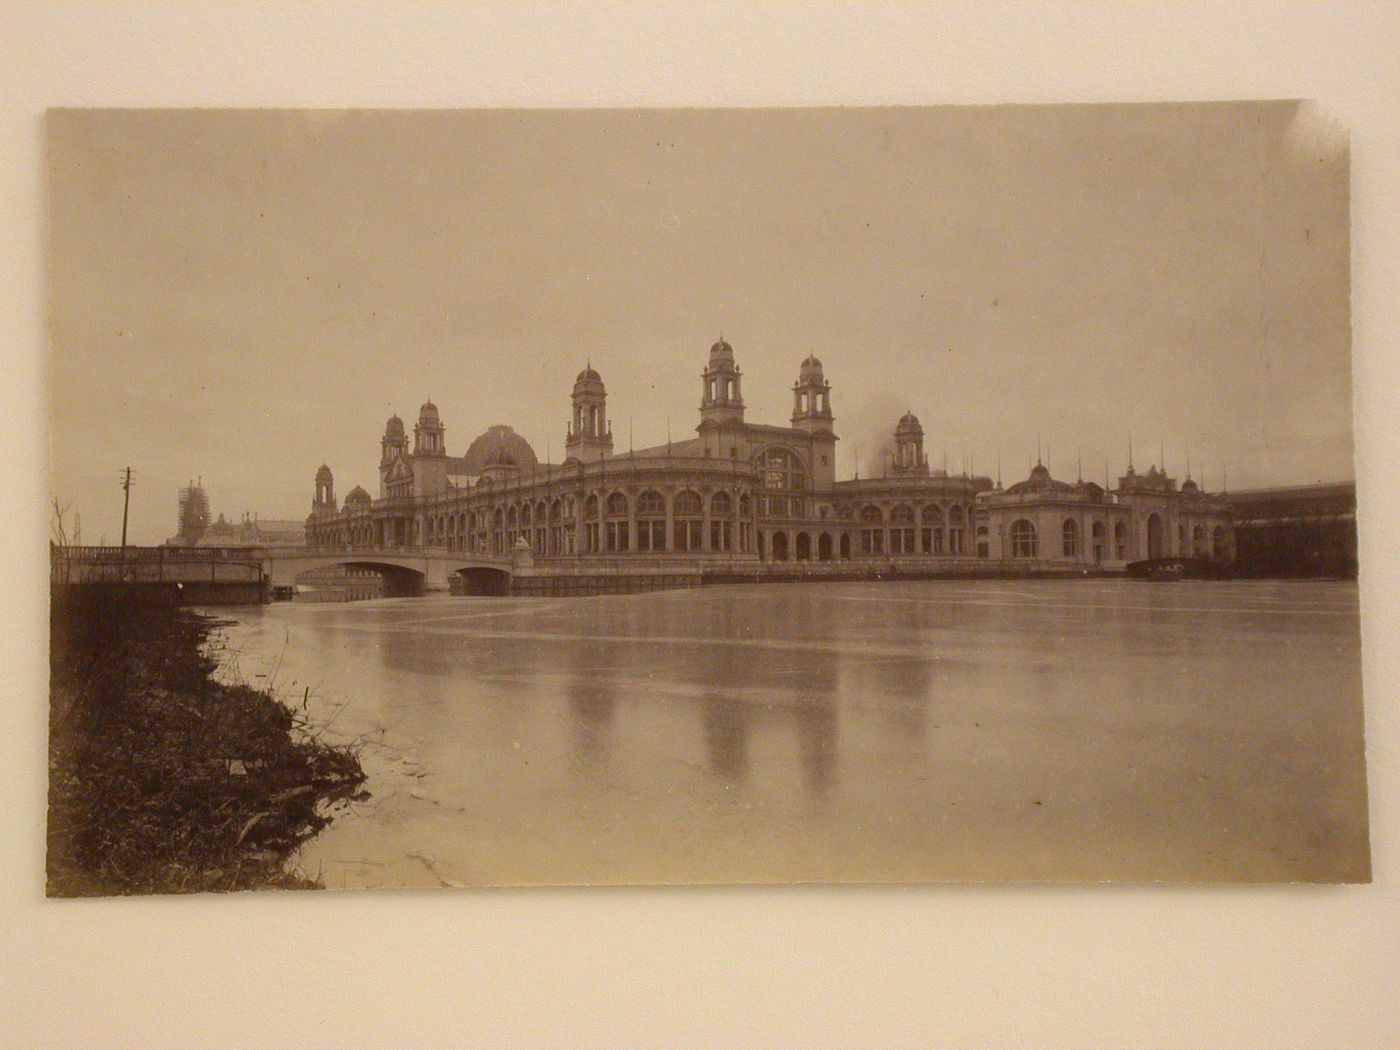 View of the north and east façades of the Electricity Building from the east bank of the Lagoon with the Mines and Mining Building in the background, 1893 Chicago World's Columbian Exhibition, Chicago, Illinois